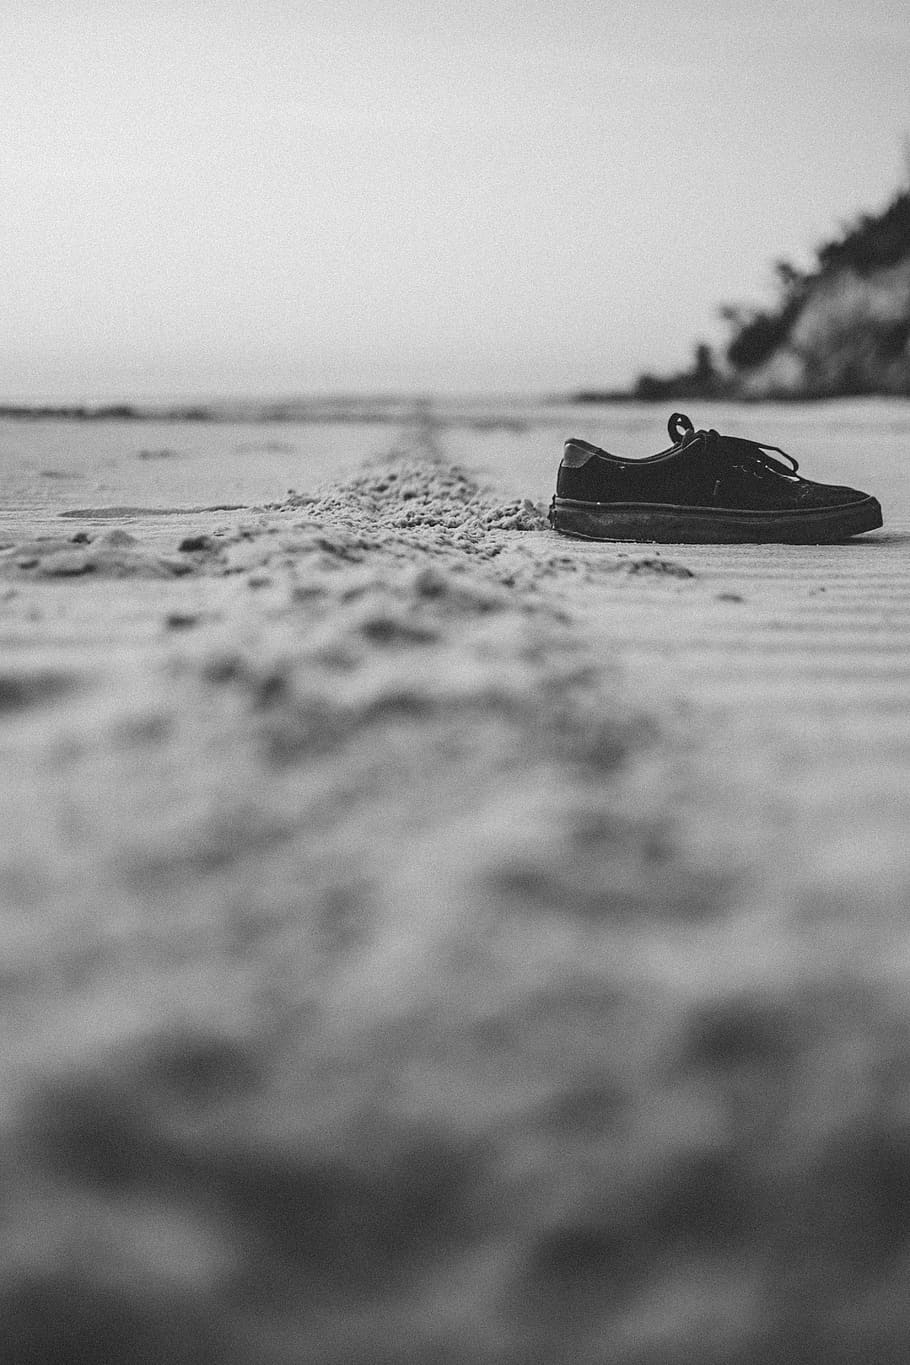 black suede lace-up shoe, bw, van, sunset, beach, sand, sneaker